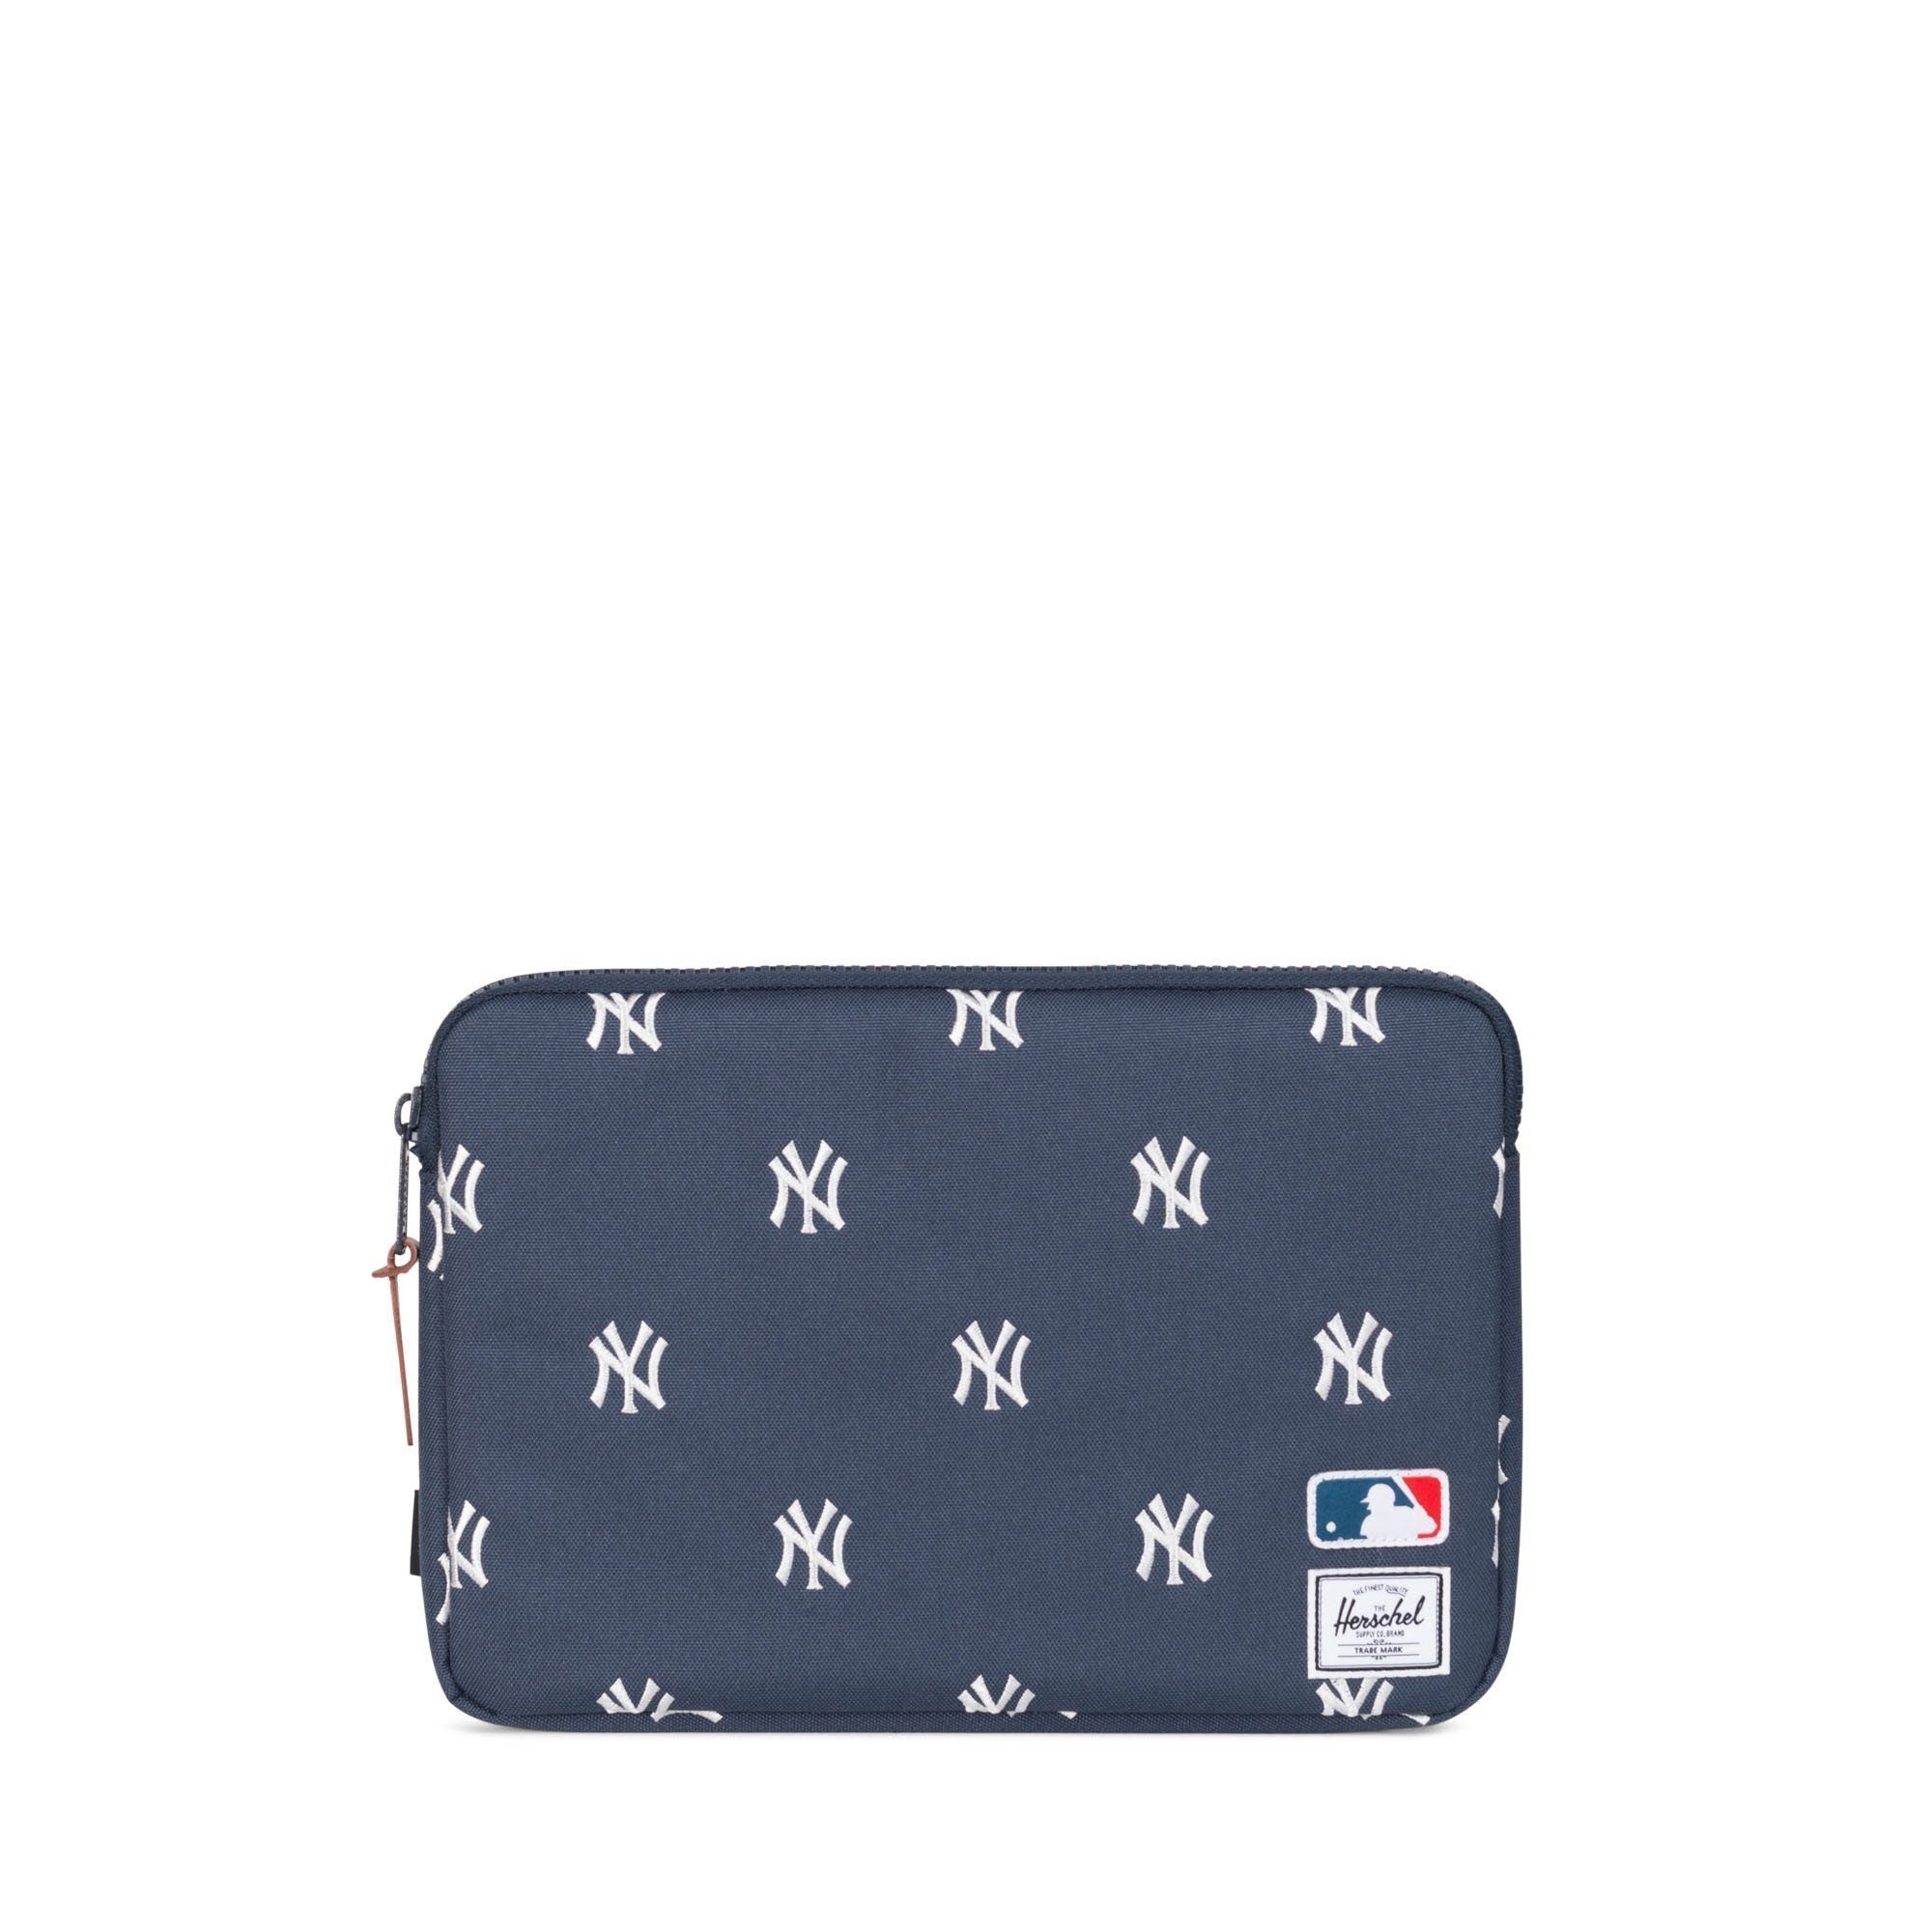 BAGS - Herschel Supply Co Anchor 600D Poly New York Yankees MLB 10054-01228